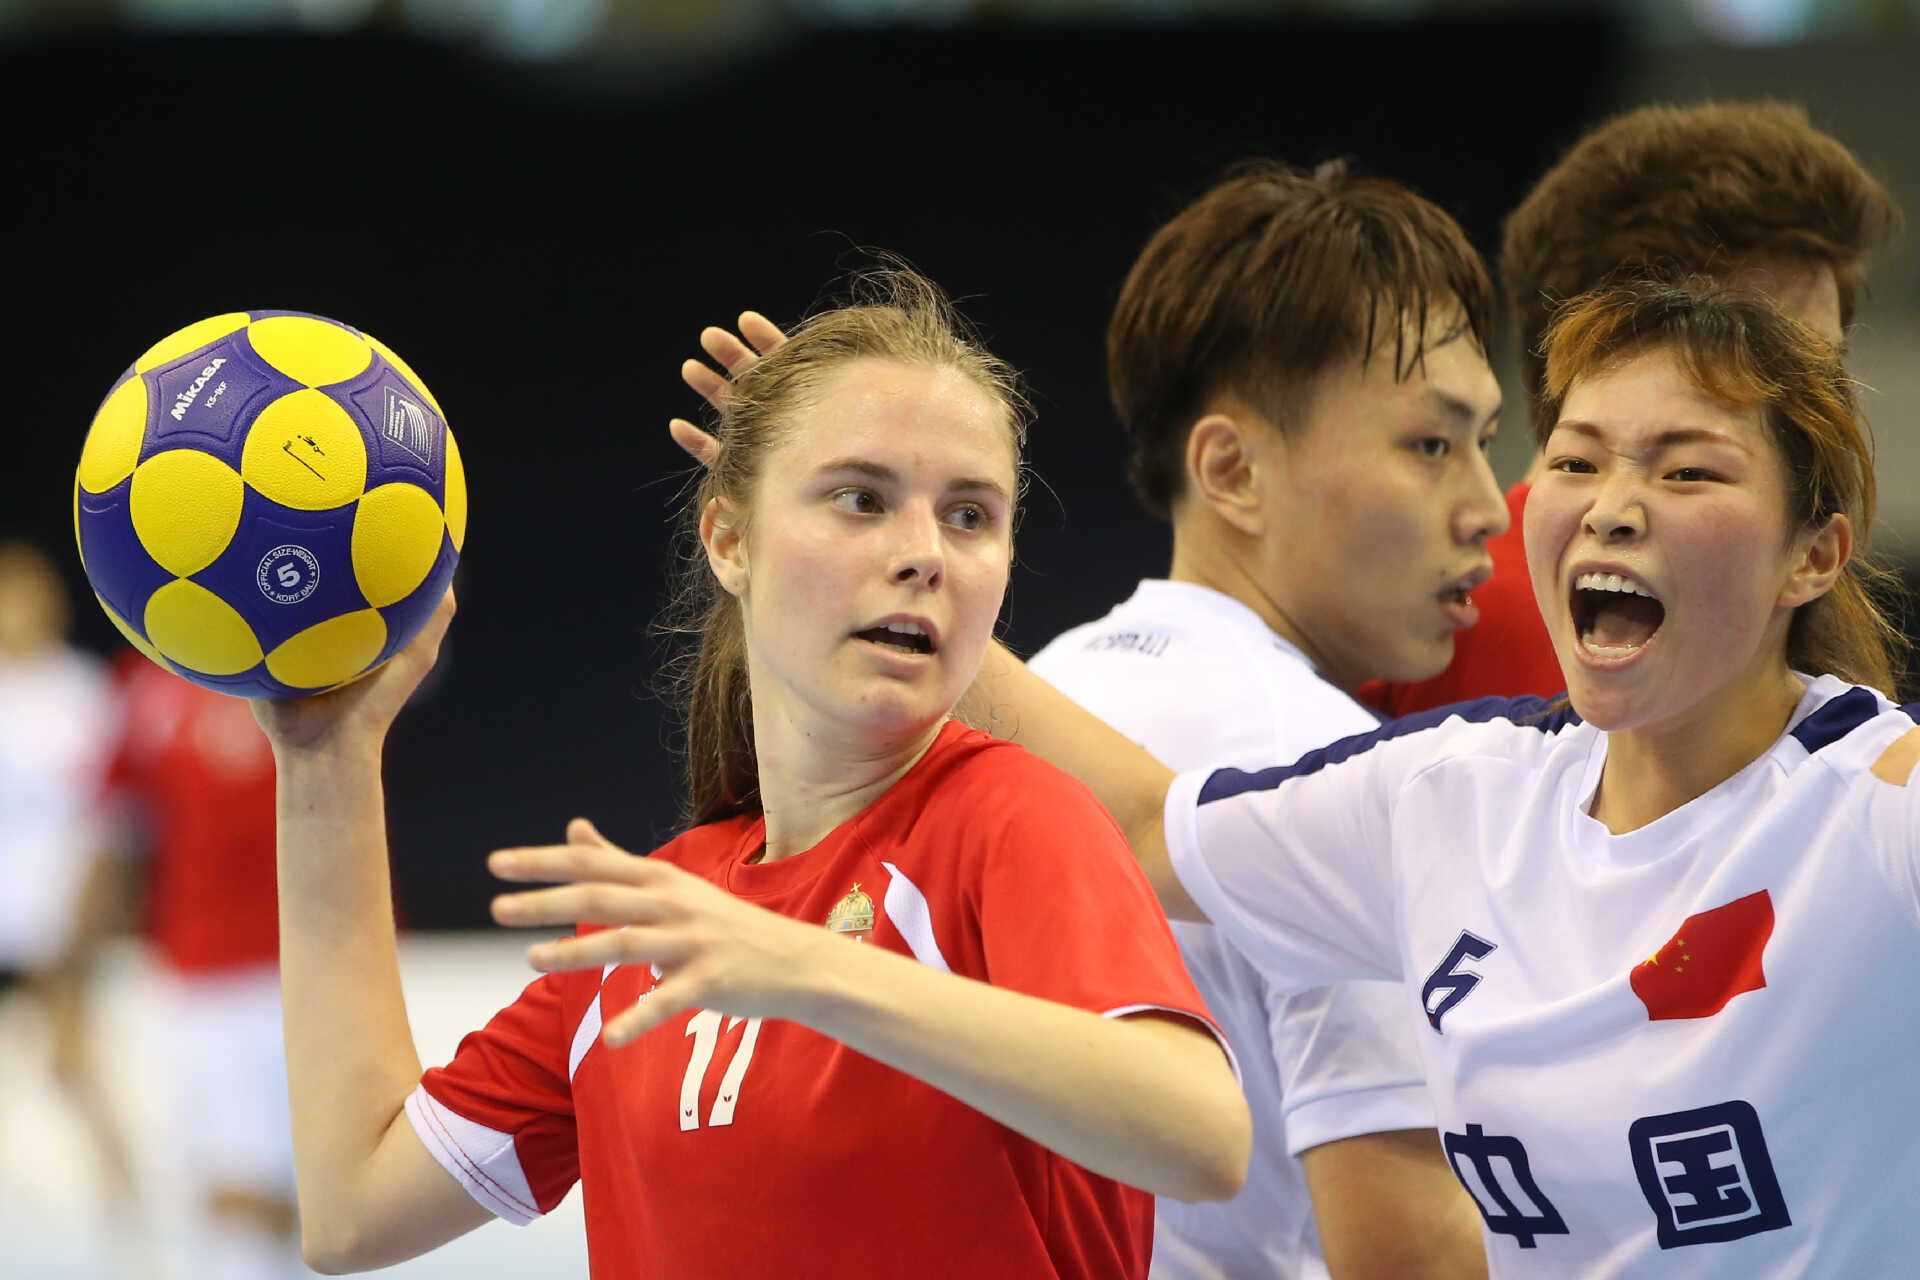 Female korfball player preparing to throw with opposition player behind about to defend